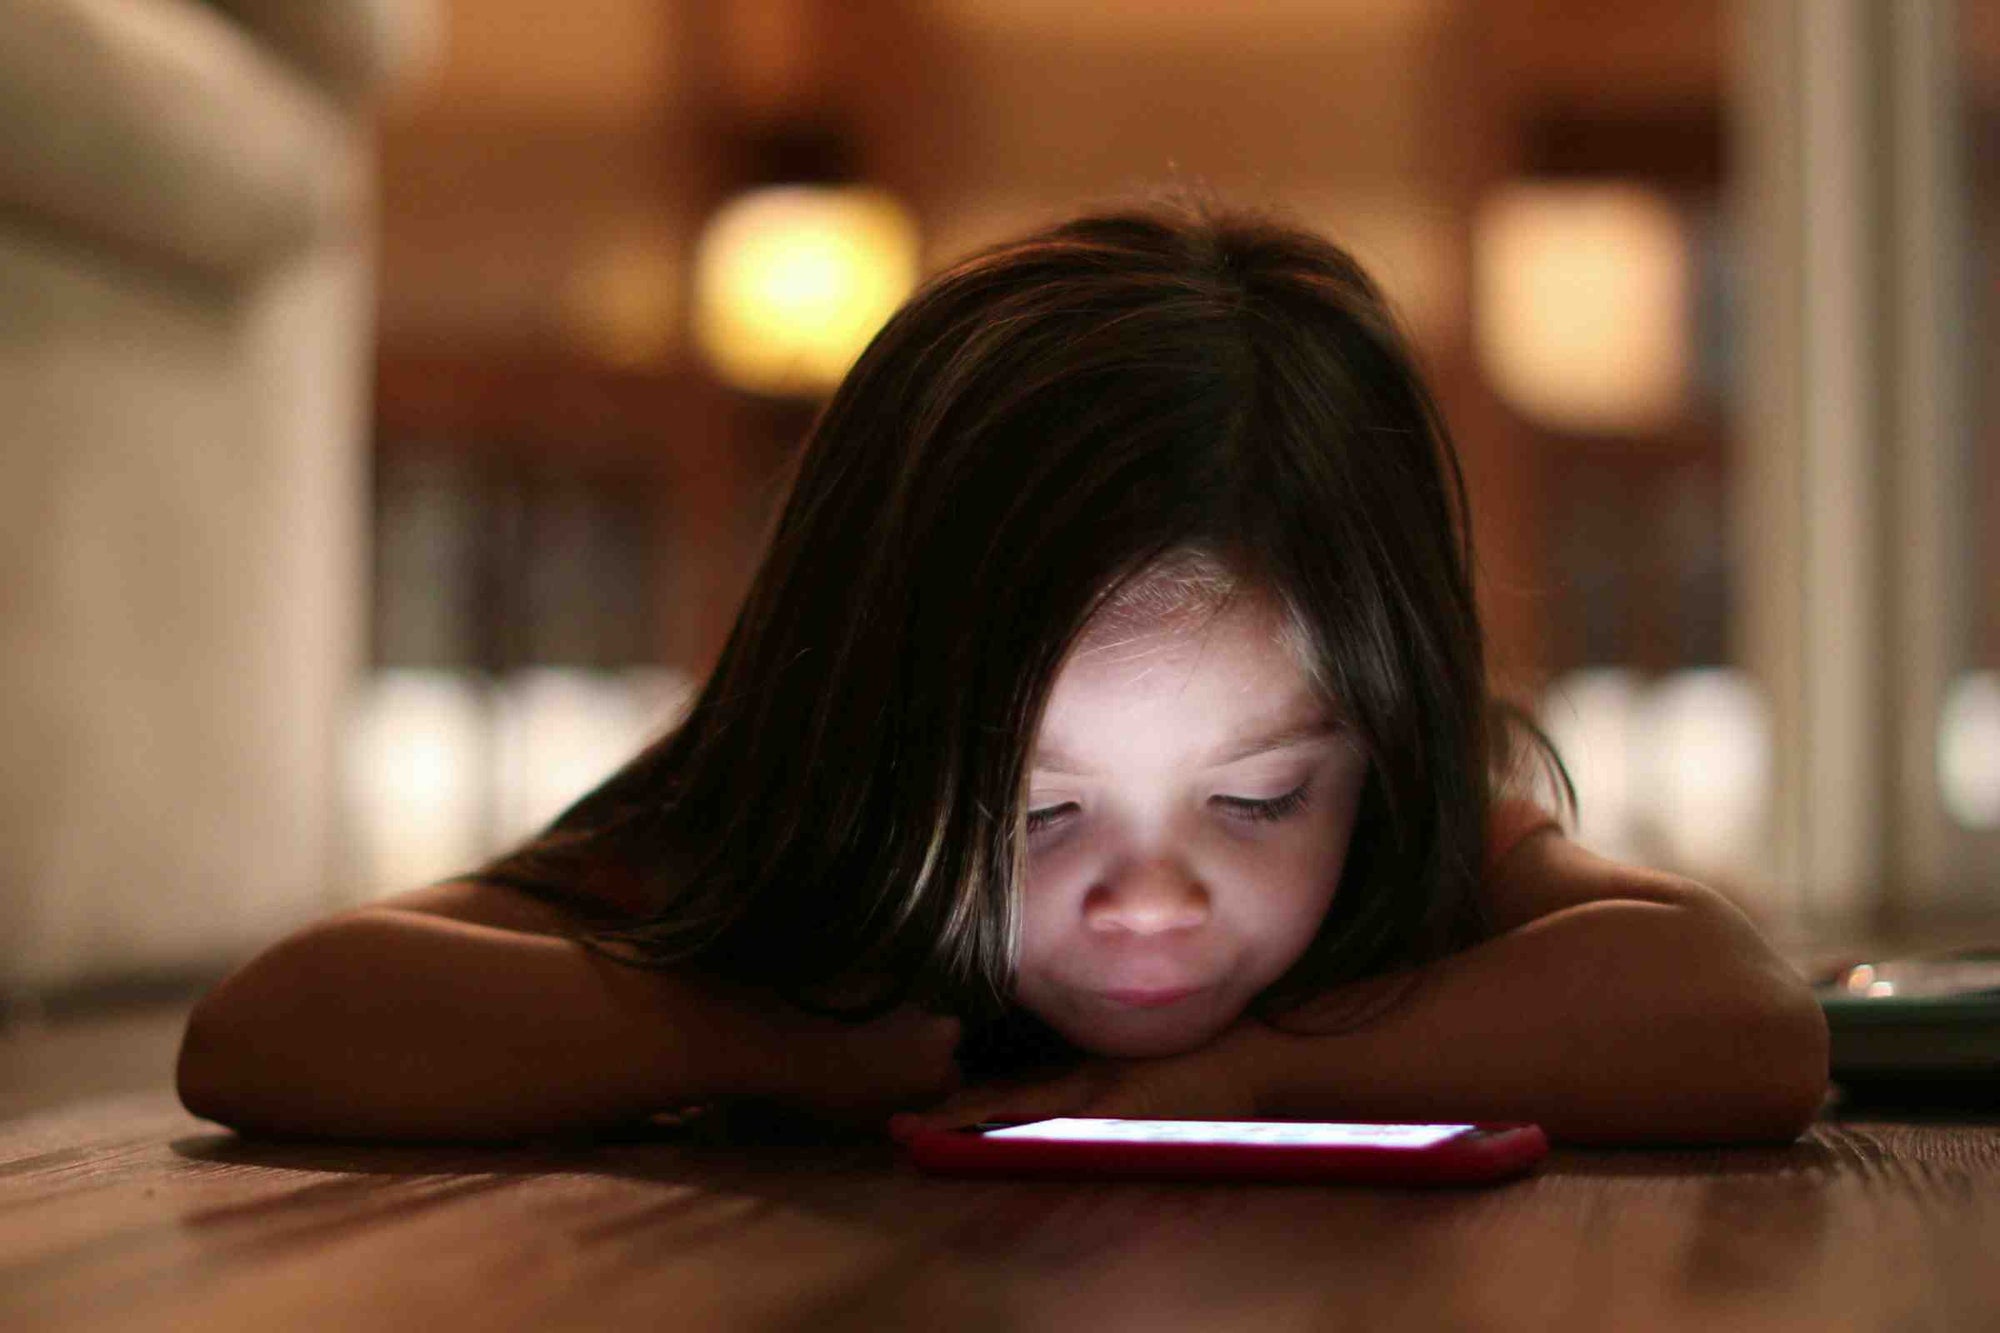 A young girl fixated on a phone with the screen's light illuminating her face.  The image suggests that screentime may impact a child's mental health.